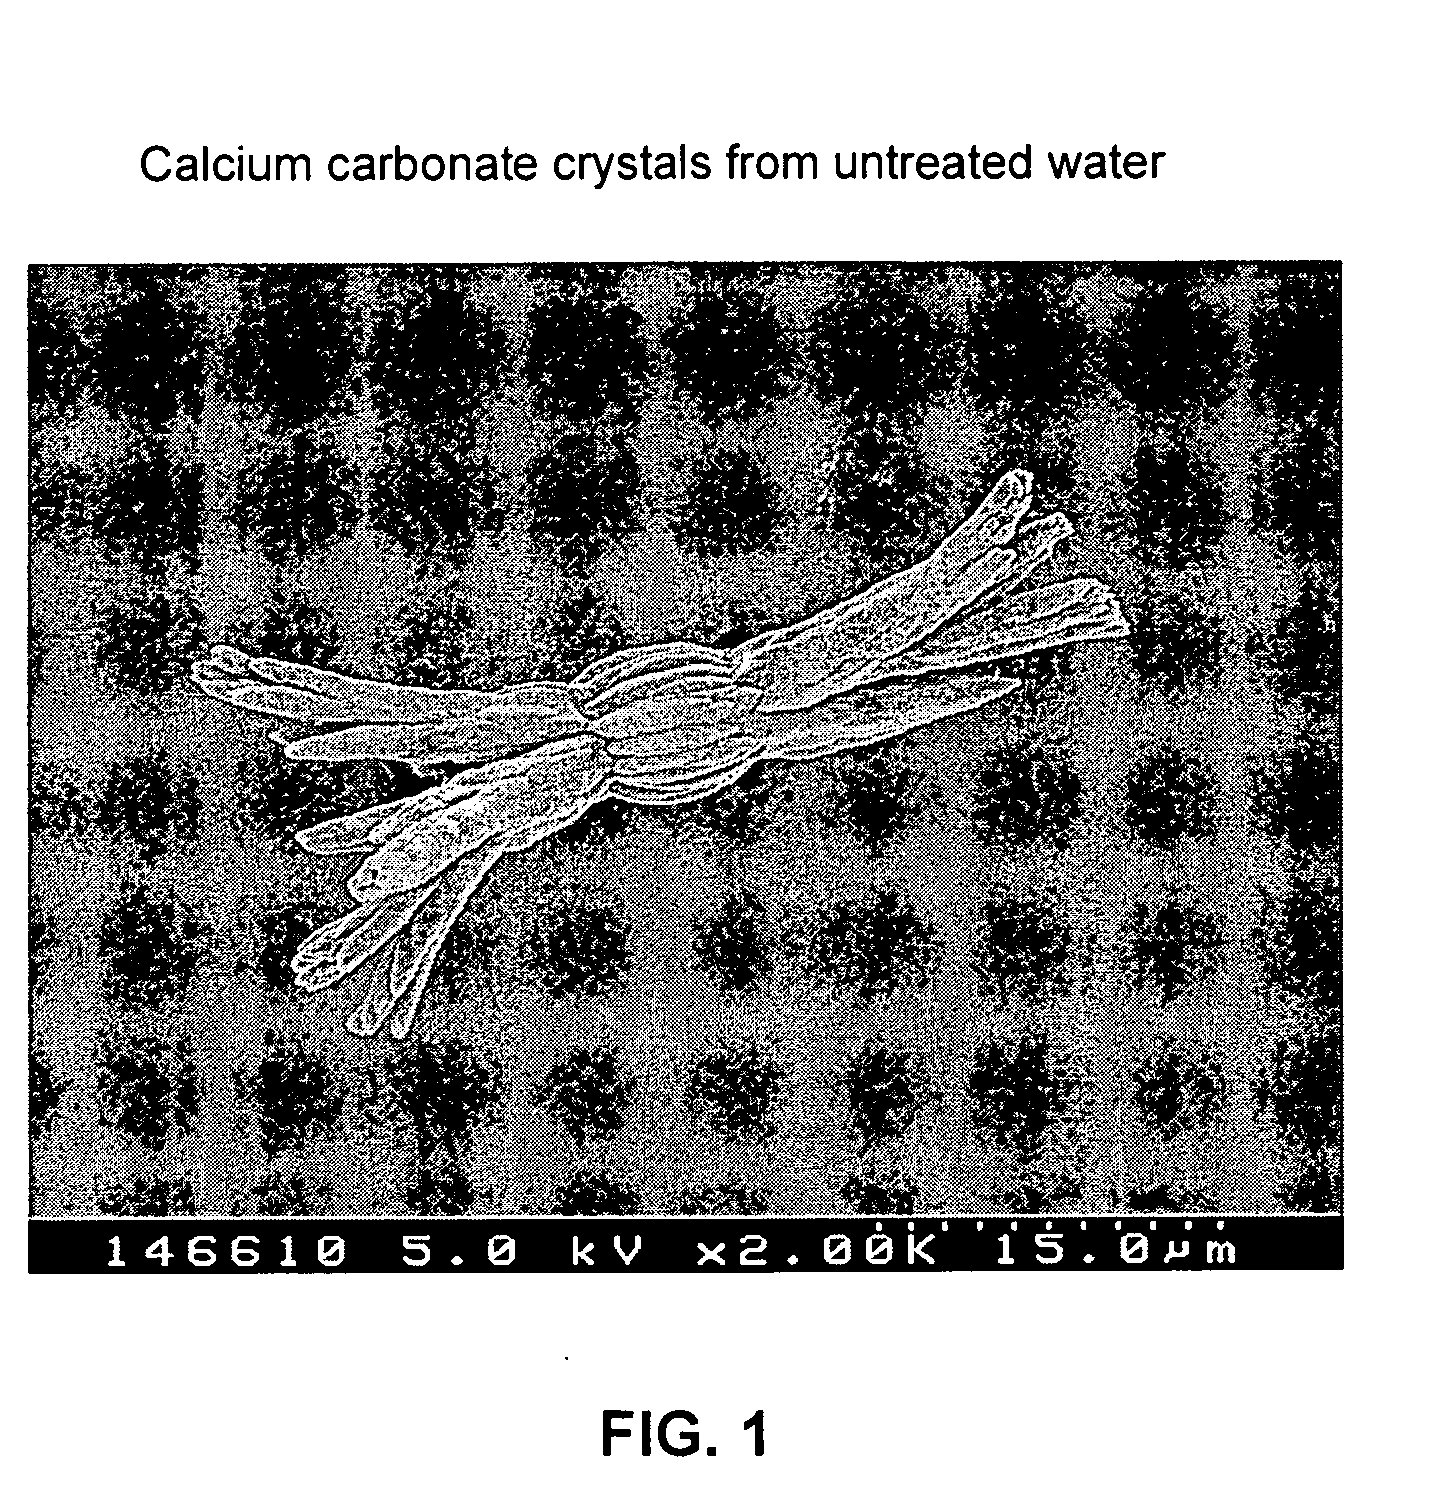 Systems and methods for generation of low zeta potential mineral crystals to enhance quality of liquid solutions